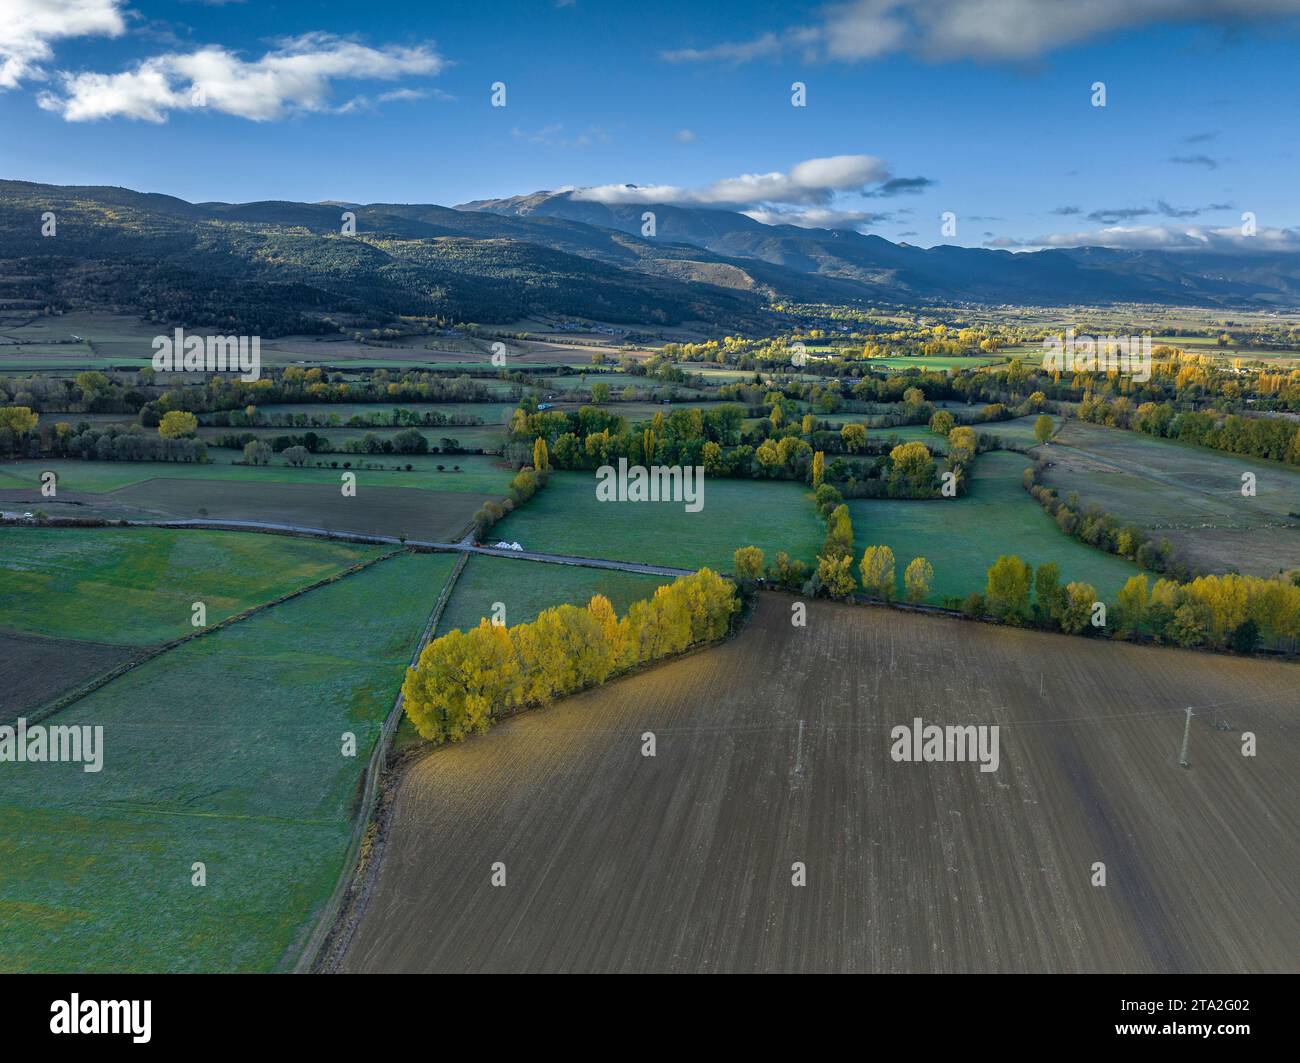 Aerial view of the city of Puigcerdà and its rural surroundings on an autumn morning (Cerdanya, Catalonia, Spain, Pyrenees) Stock Photo